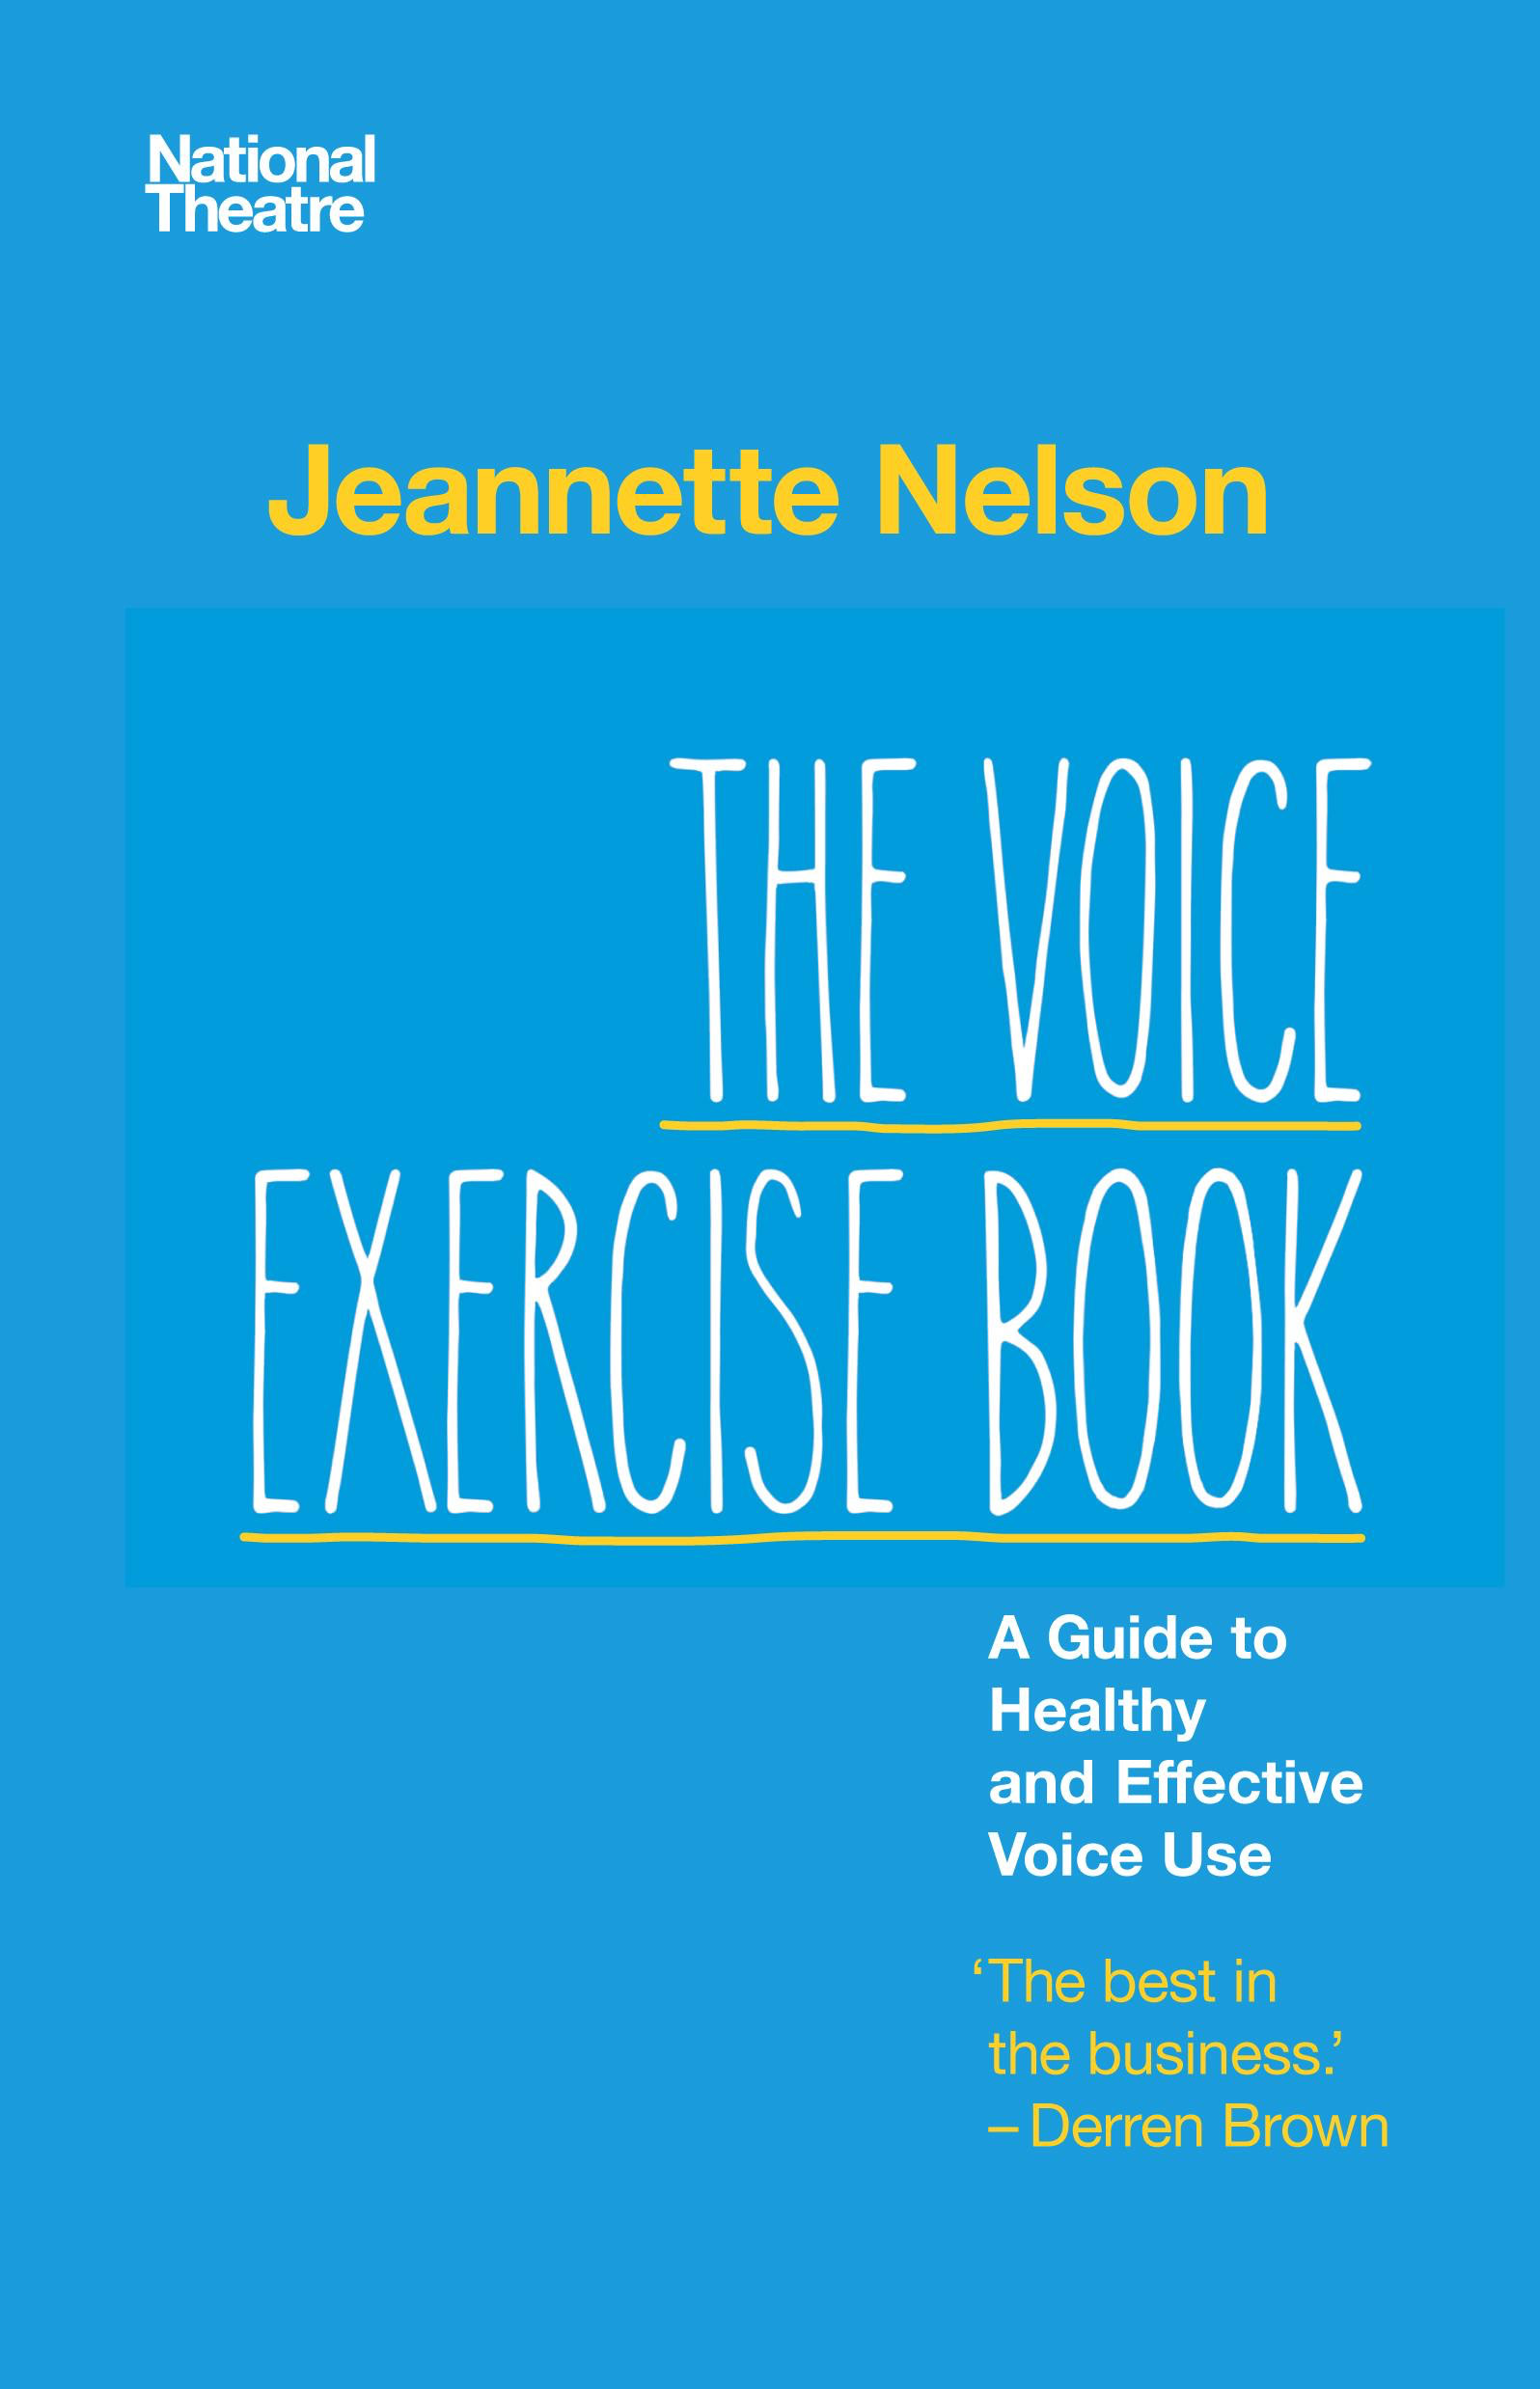 Book Review: The Voice Exercise Book